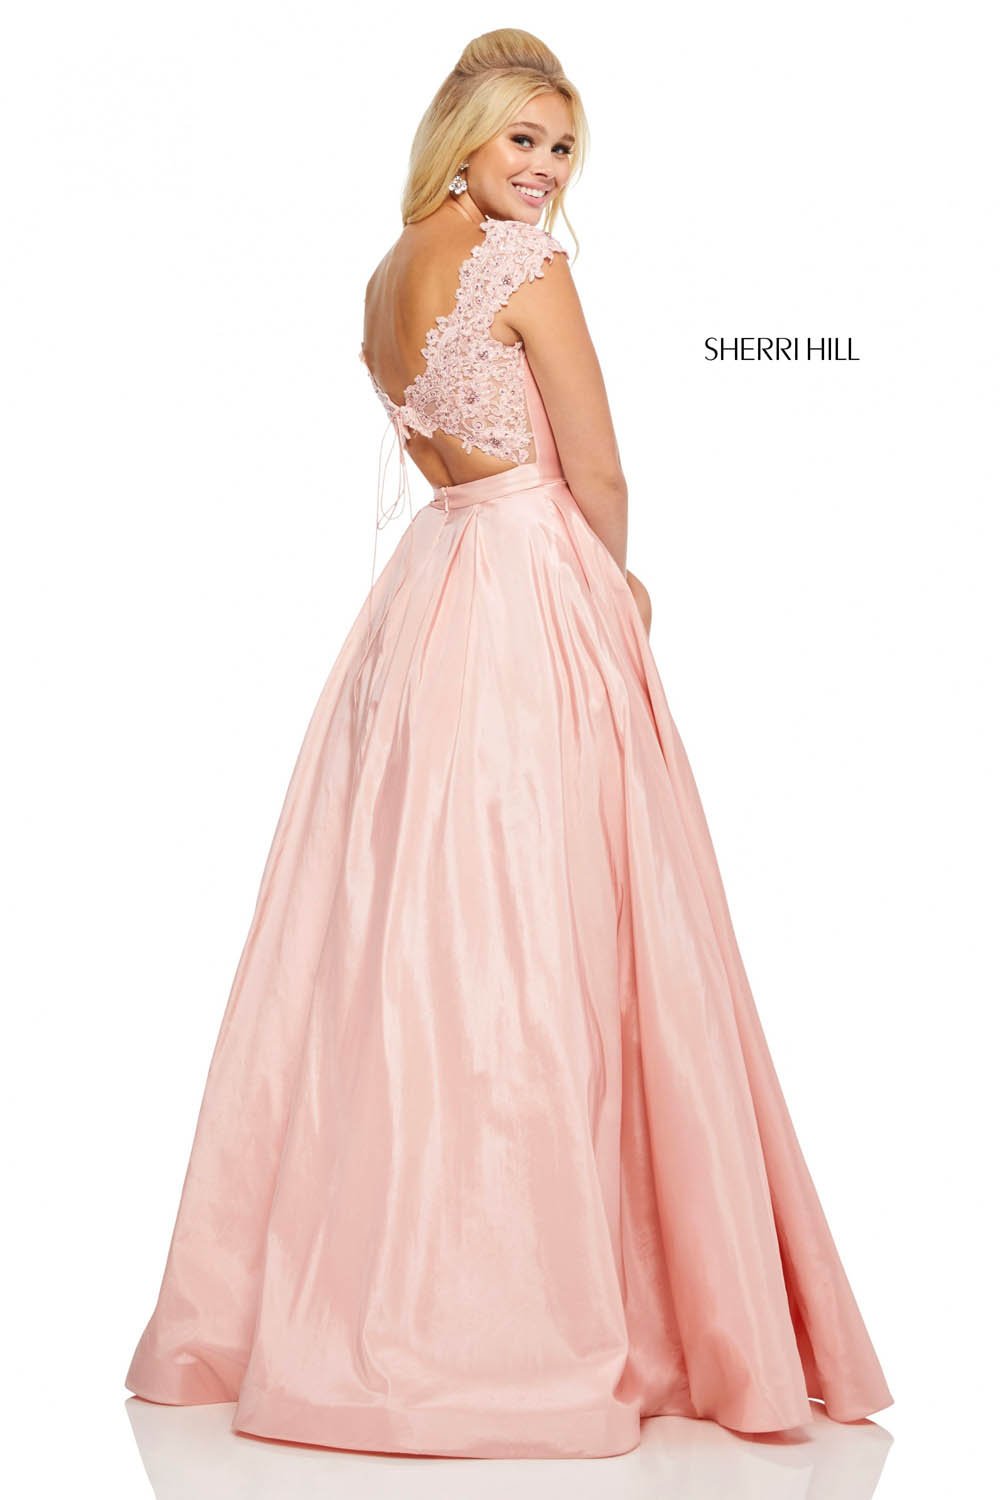 Sherri Hill 52487 dress images in these colors: Blush, Light Blue, Ivory, Navy, Red, Black.